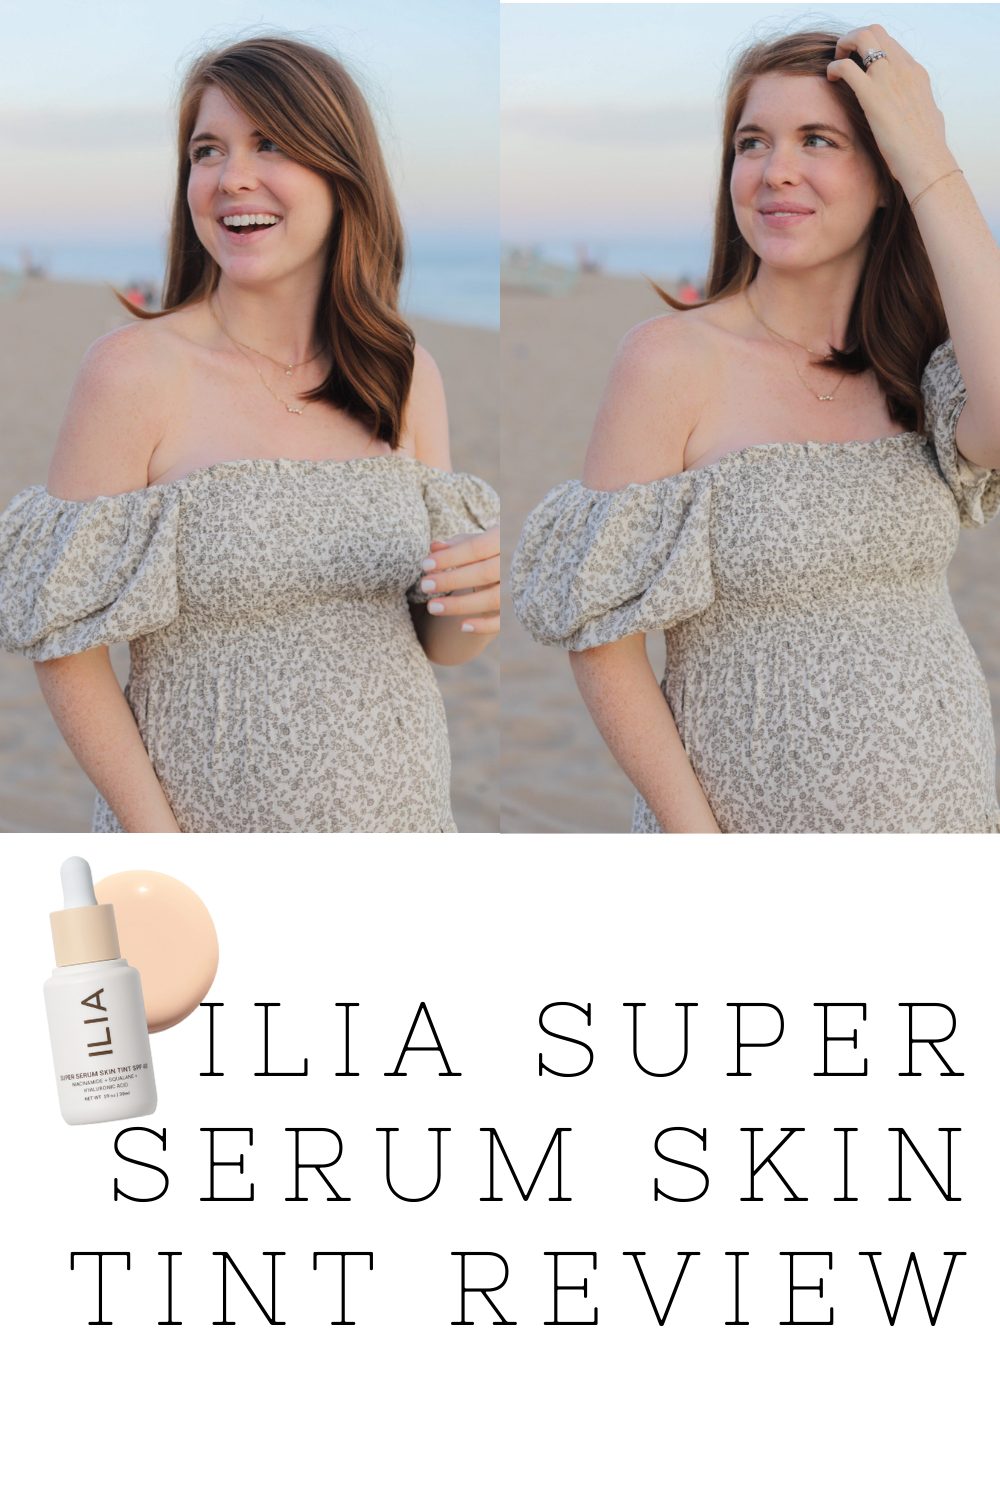 Ilia Super Serum Skin Tint Review, makeup for fair skin, redhead, foundation with sunscreen, lments of style, la blogger, nontoxic beauty makeup skincare, natural cruelty free, nothing fits but kiko dress